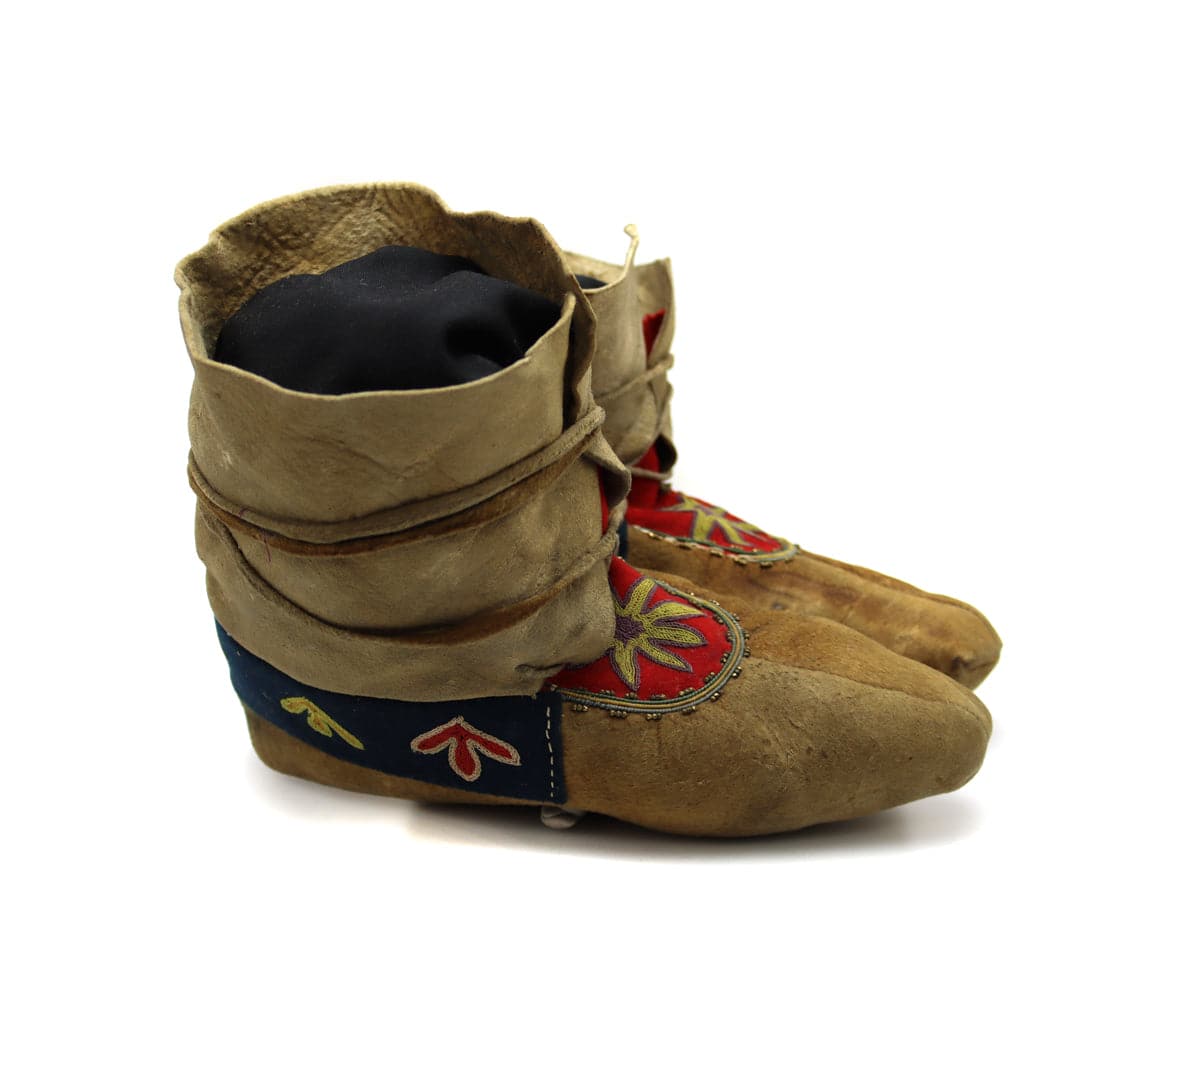 Athabaskan Leather, Trade Cloth, and Beaded Moccasins c. 1890-1900s, 6.75" x 9.5" (DW92323A-0421-001) 2
